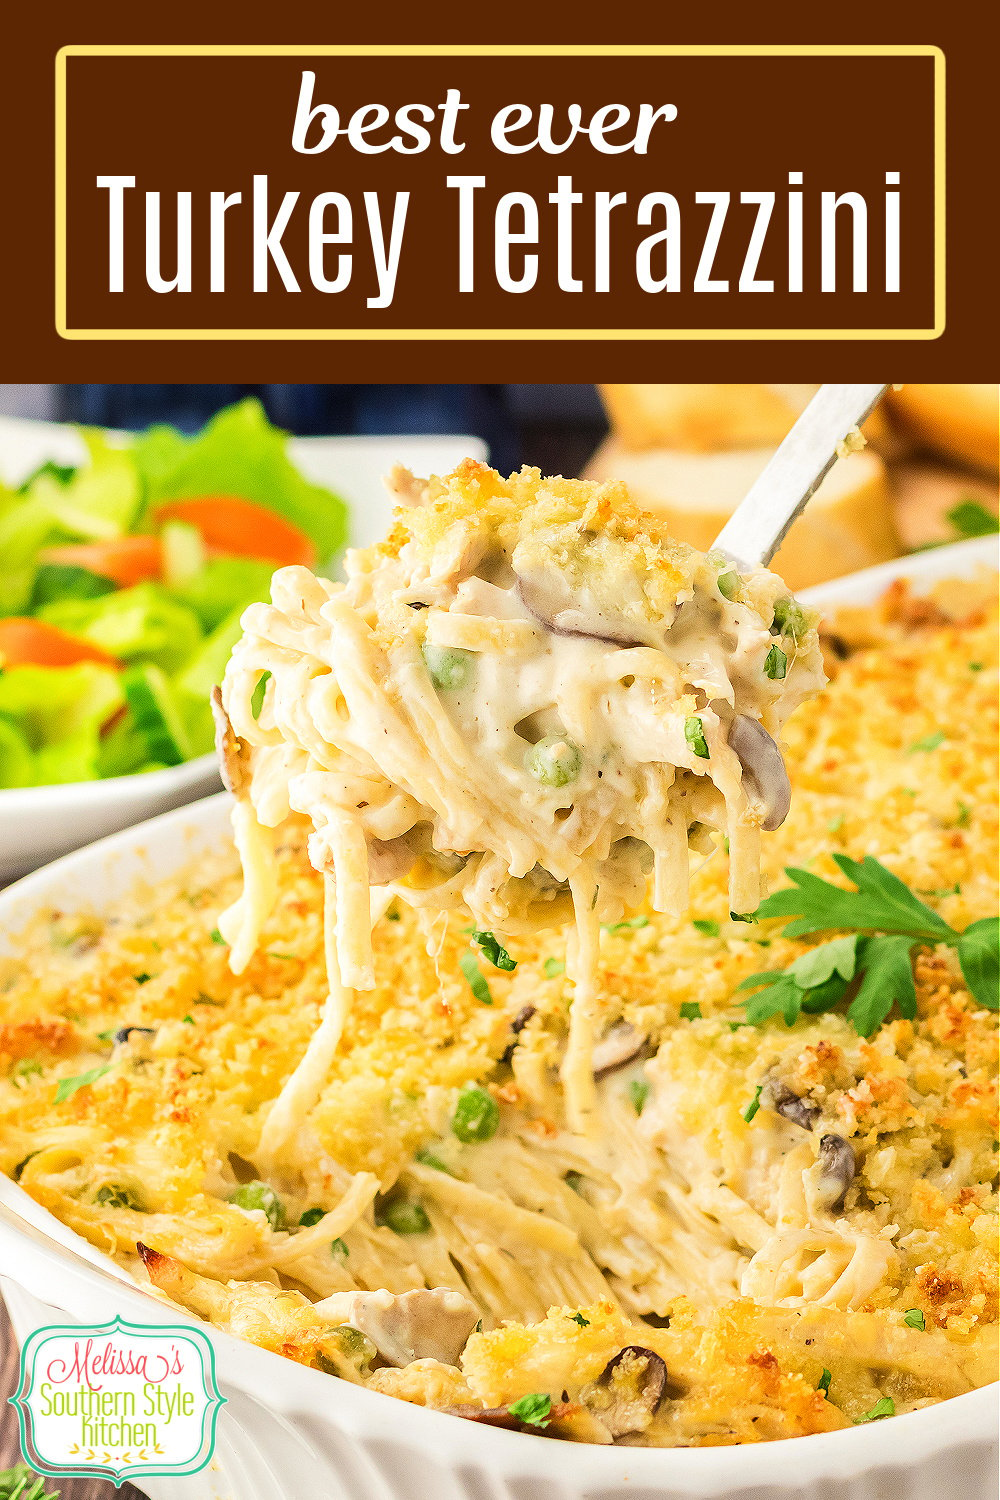 Ditch the canned soups and make a homemade cheese sauce for this Turkey Tetrazzini #turkeyrecipes #turkeytetrazzini #pasta #pastarecipes #homemadeturkey #leftoverturkeyrecipes via @melissasssk